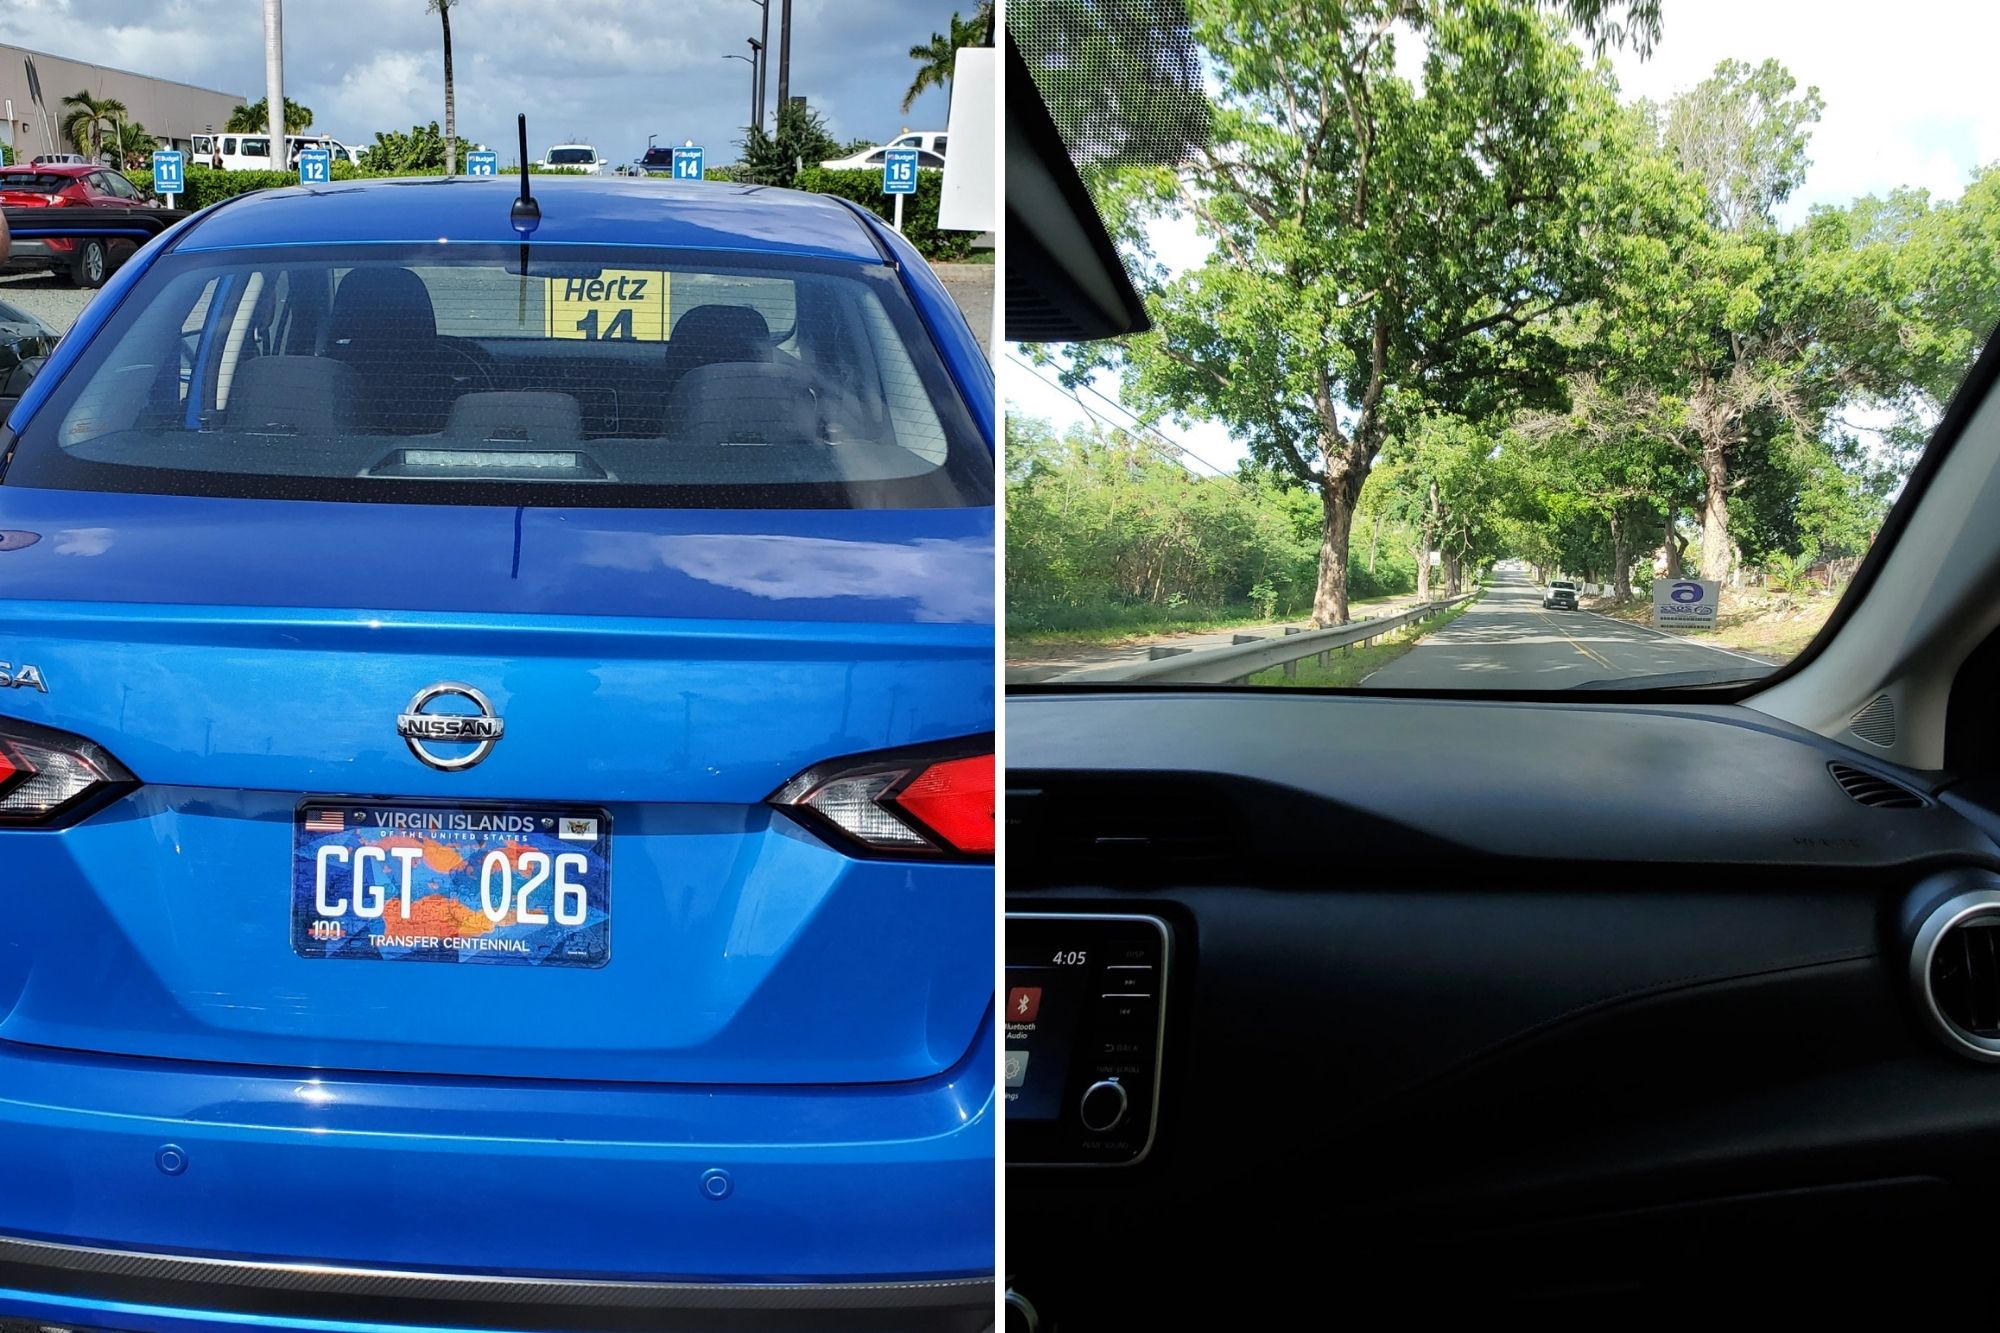 Left: A blue sedan. Right: driving on the left down a tree-lined road.